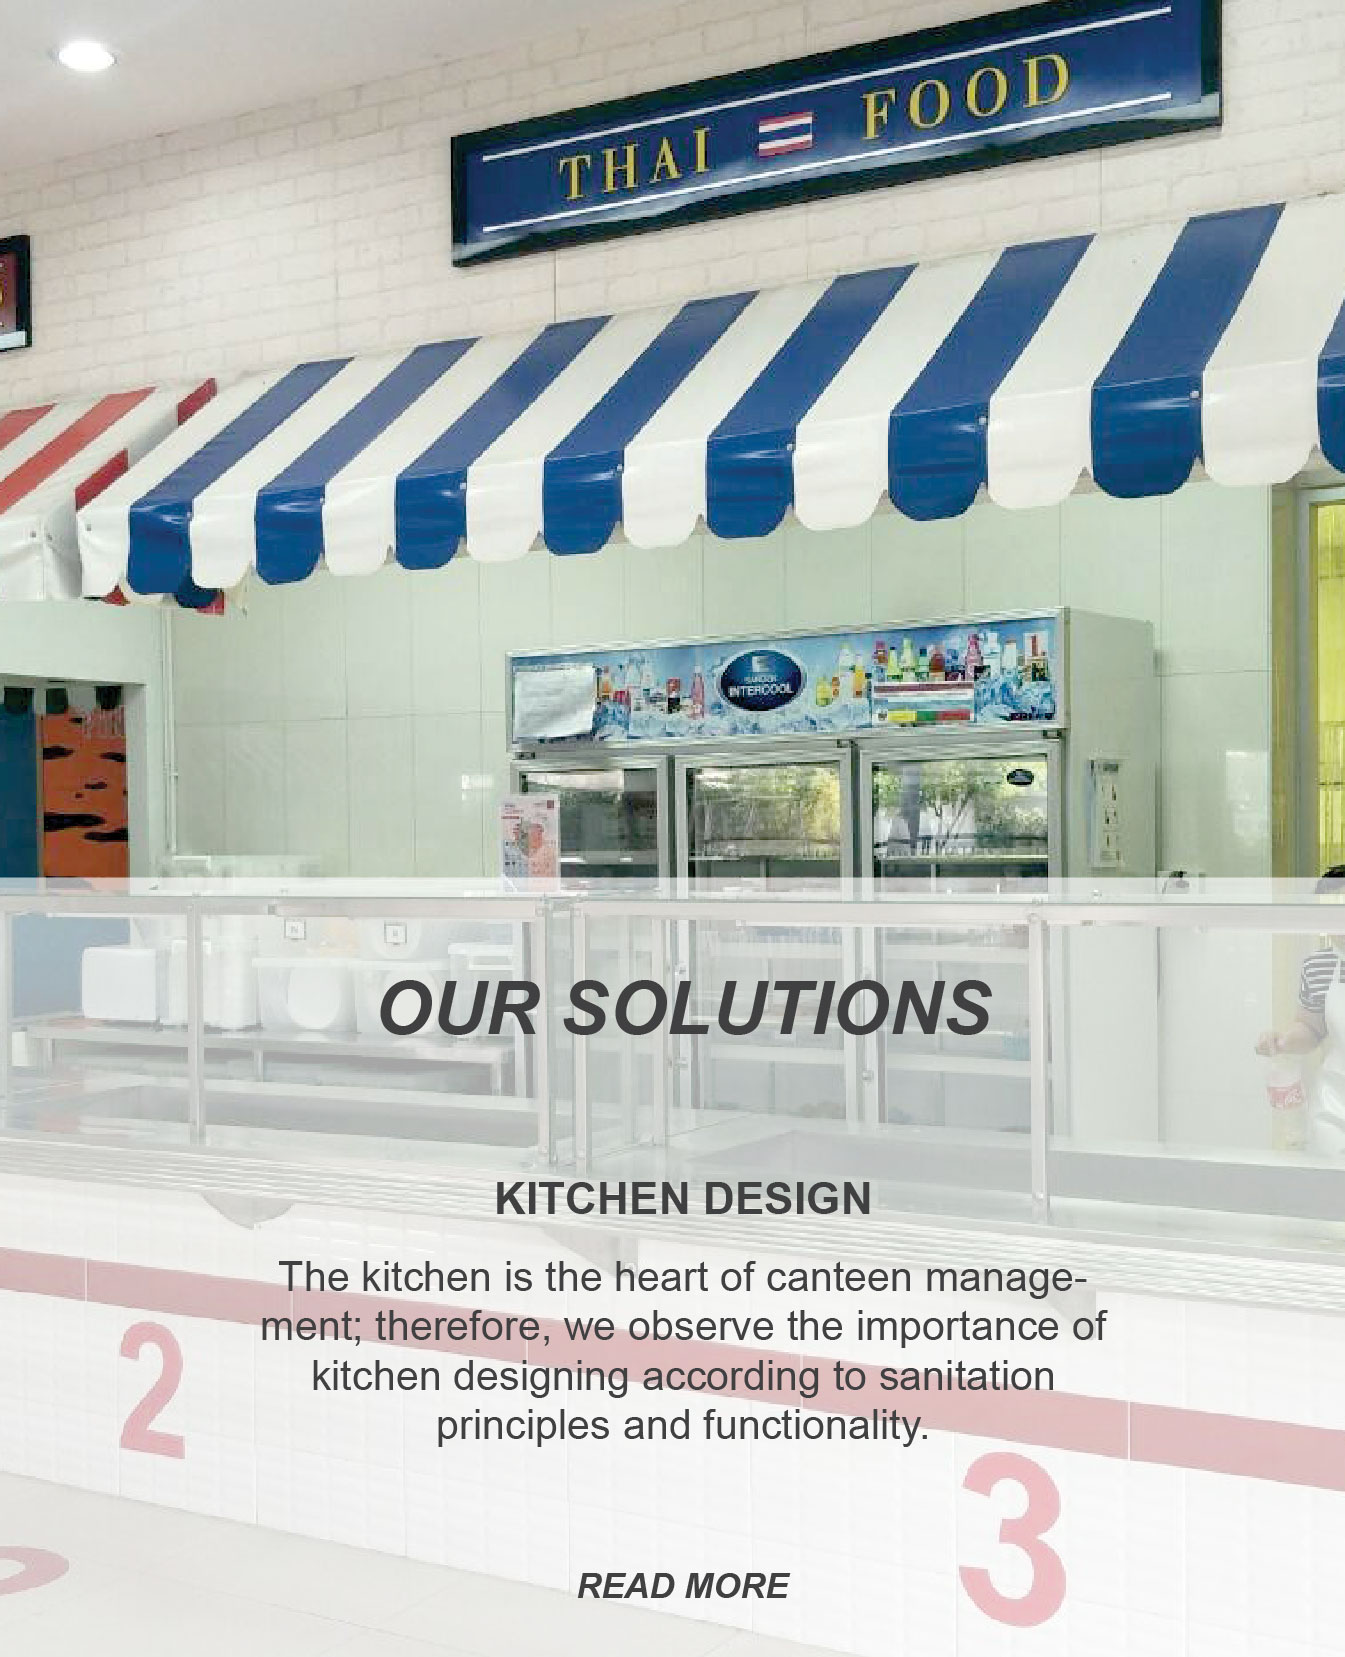 kitchen design and management solutions by observing the importance of kitchen design according to sanitation principles and functionality for the best catering service - foodhouse